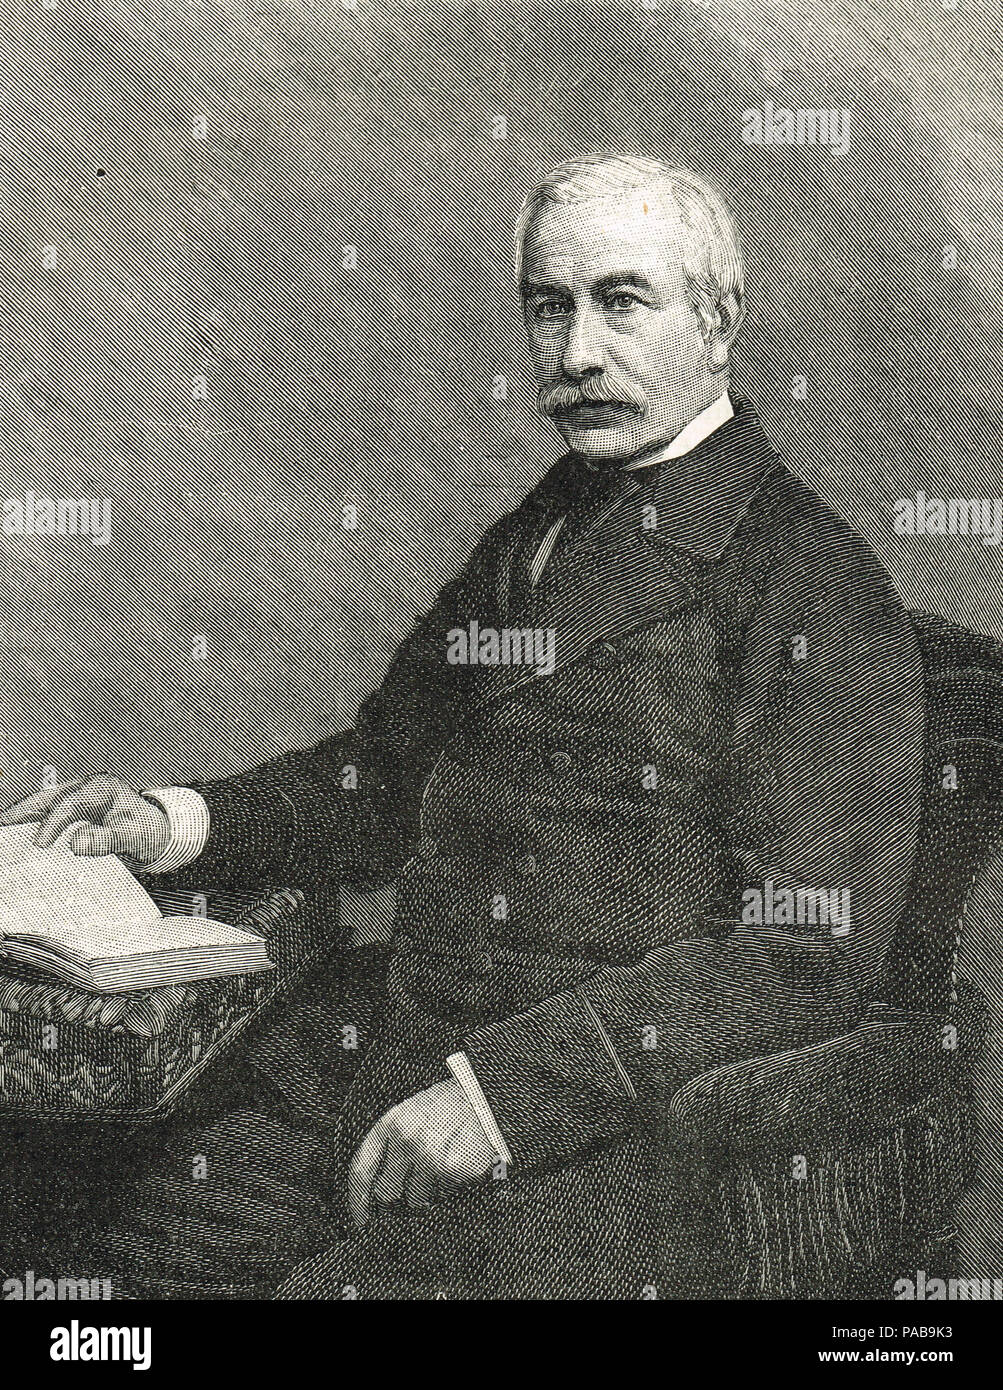 Sir Edward Henry Bartle Frere, 1st Baronet, British colonial Administrator Stockfoto